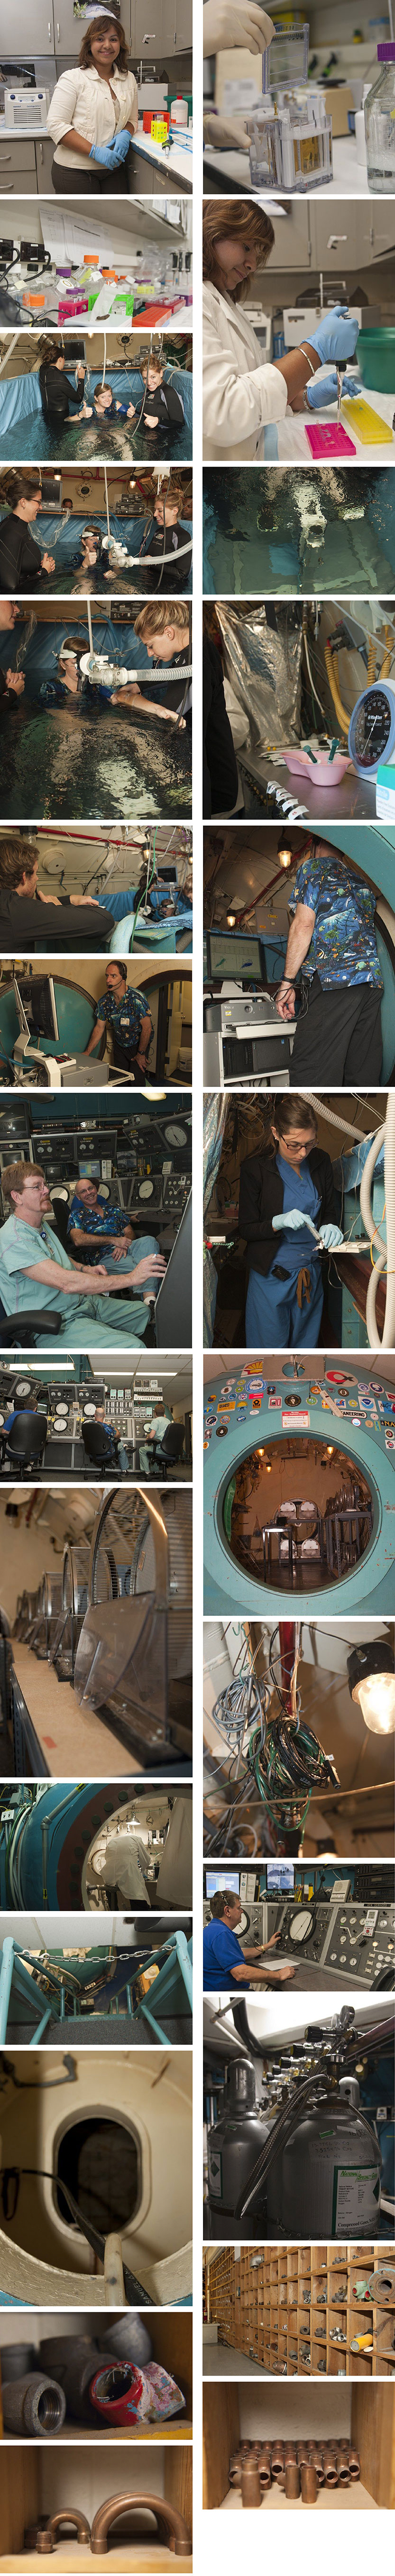 Hyperbaric Chamber photo collage